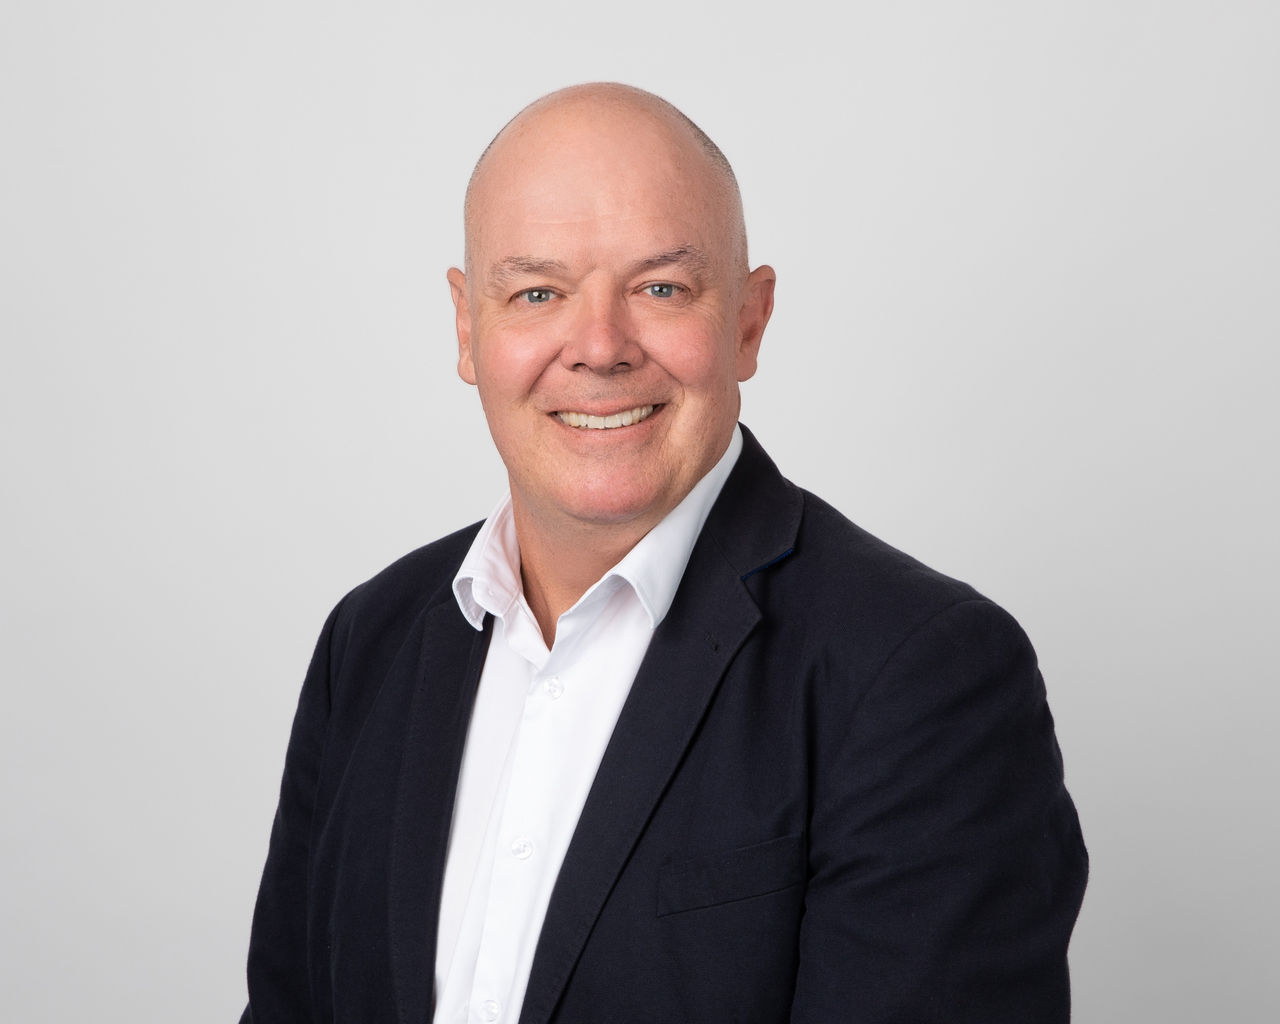 Profile Picture of Dave Courtney, Chief Customer Officer